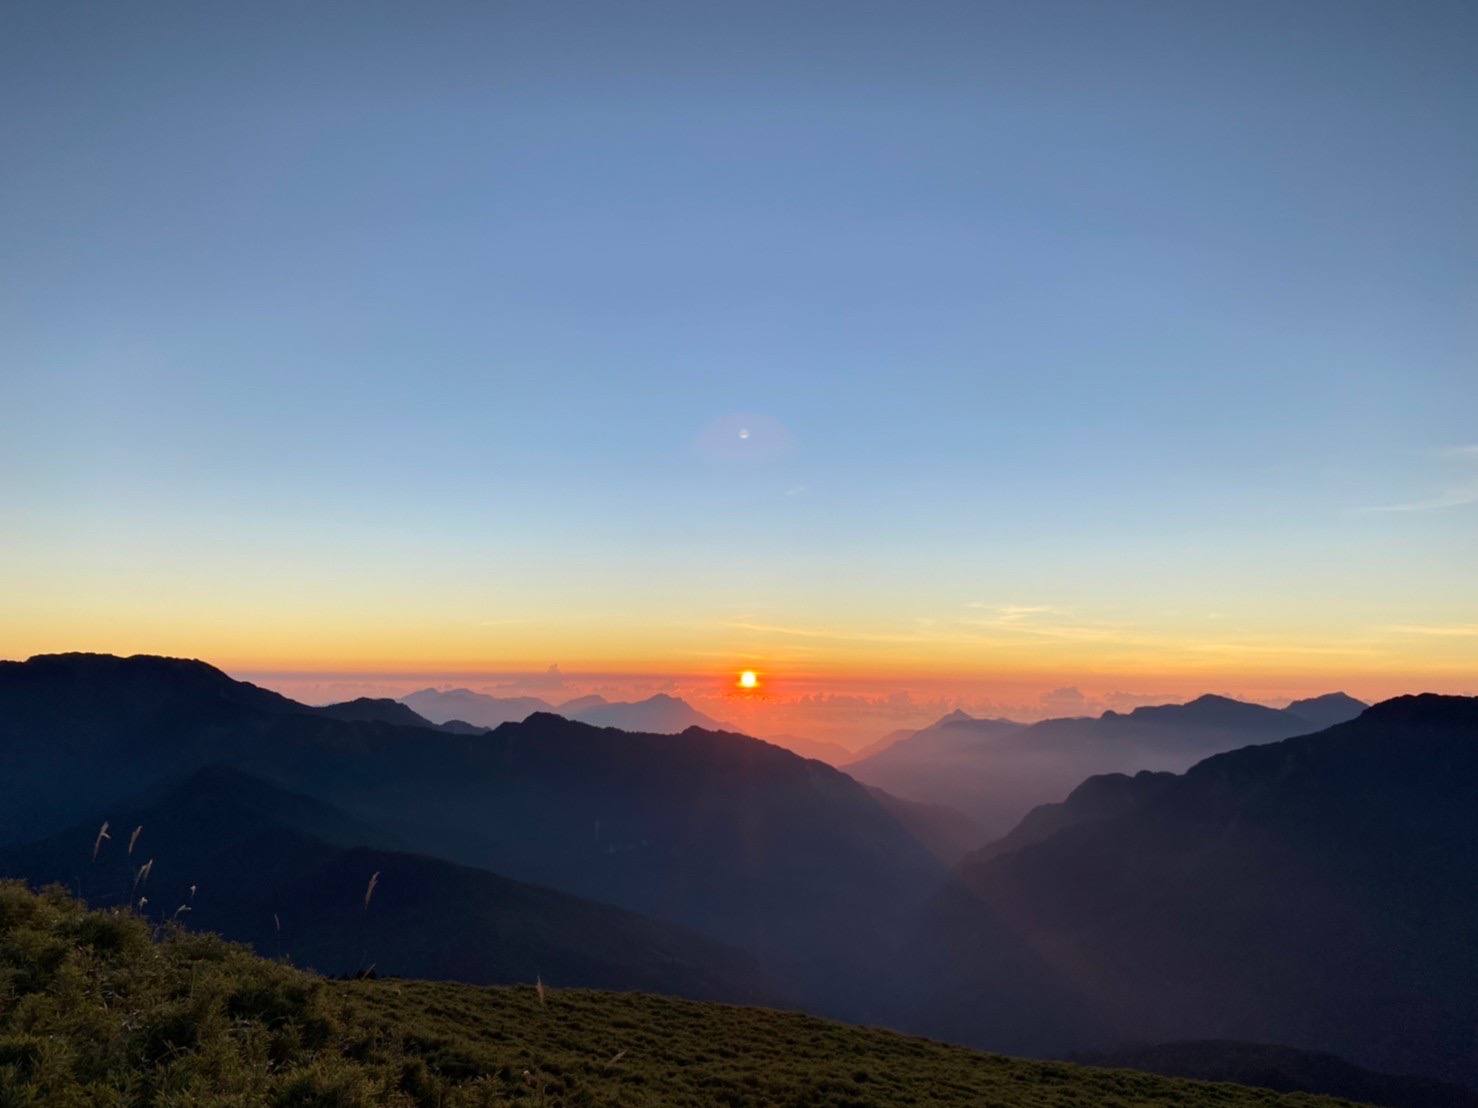 Nantou Hehuan Mountain Peaks for two days and one night | The most beautiful sunrise of Baiyue